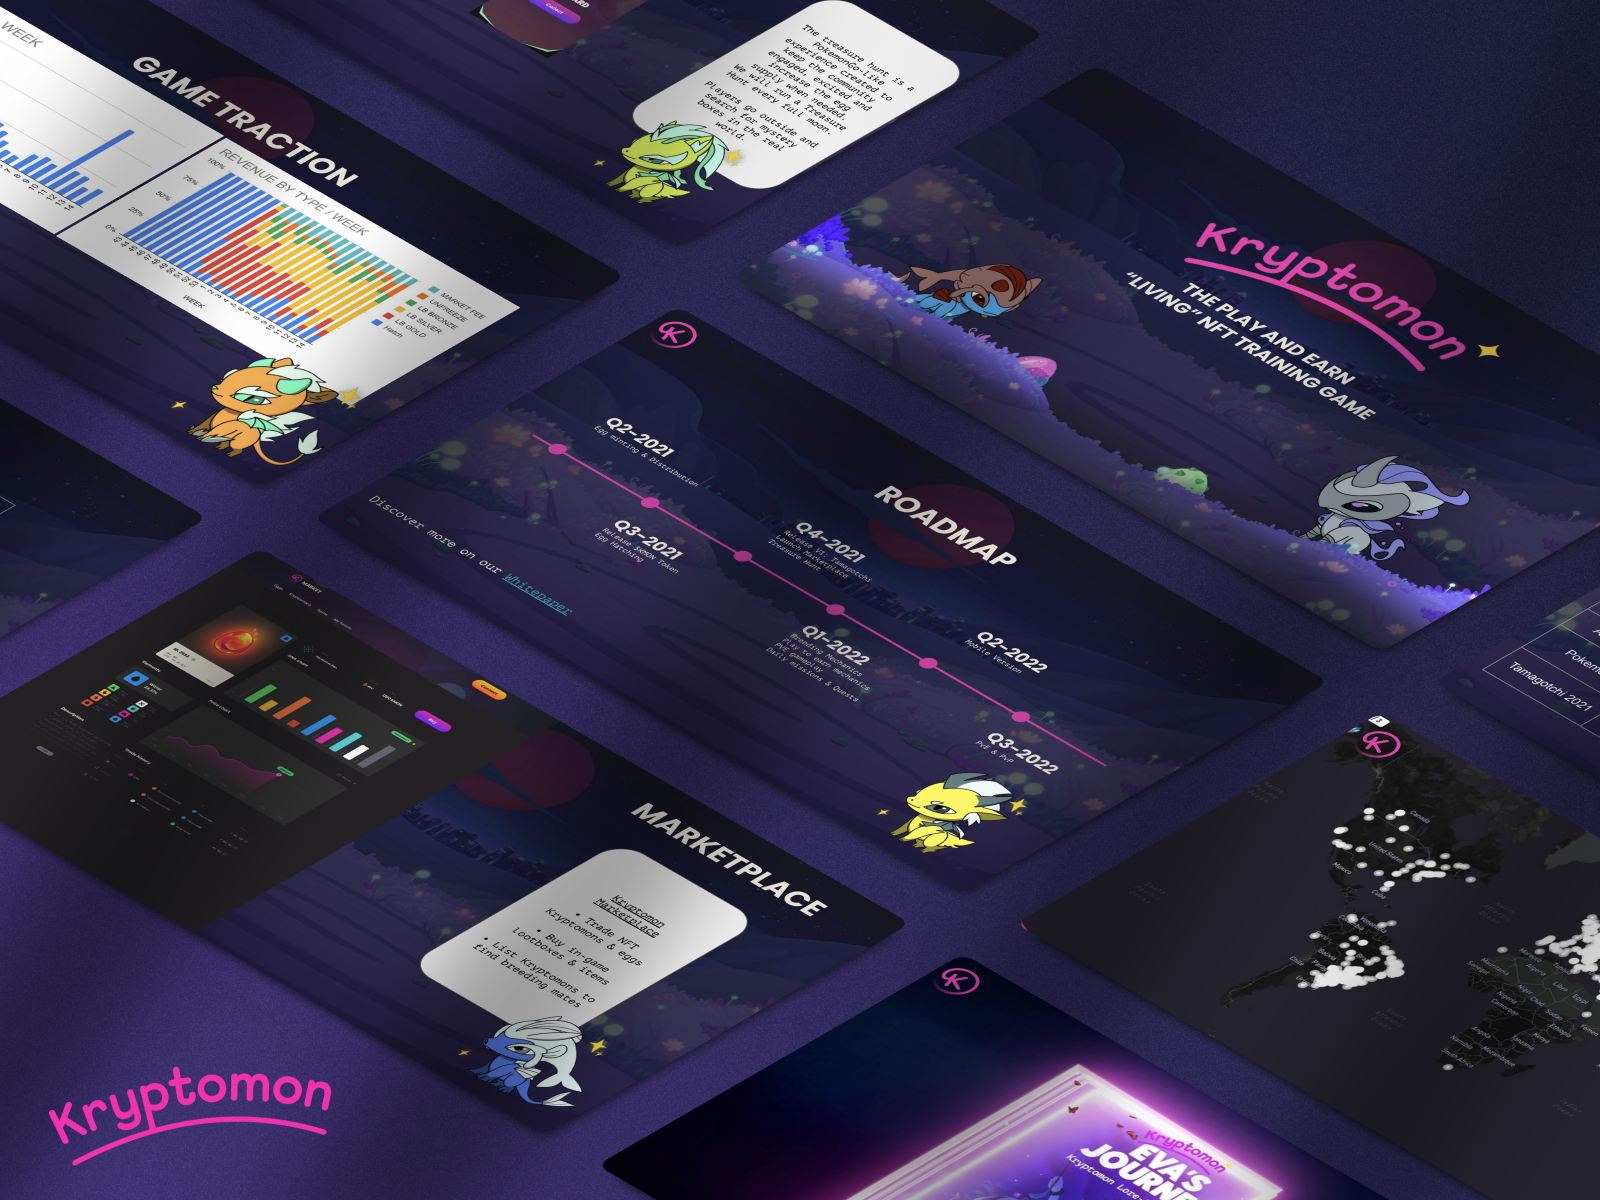 Crypto game Kryptomon raised $10M with this pitch deck